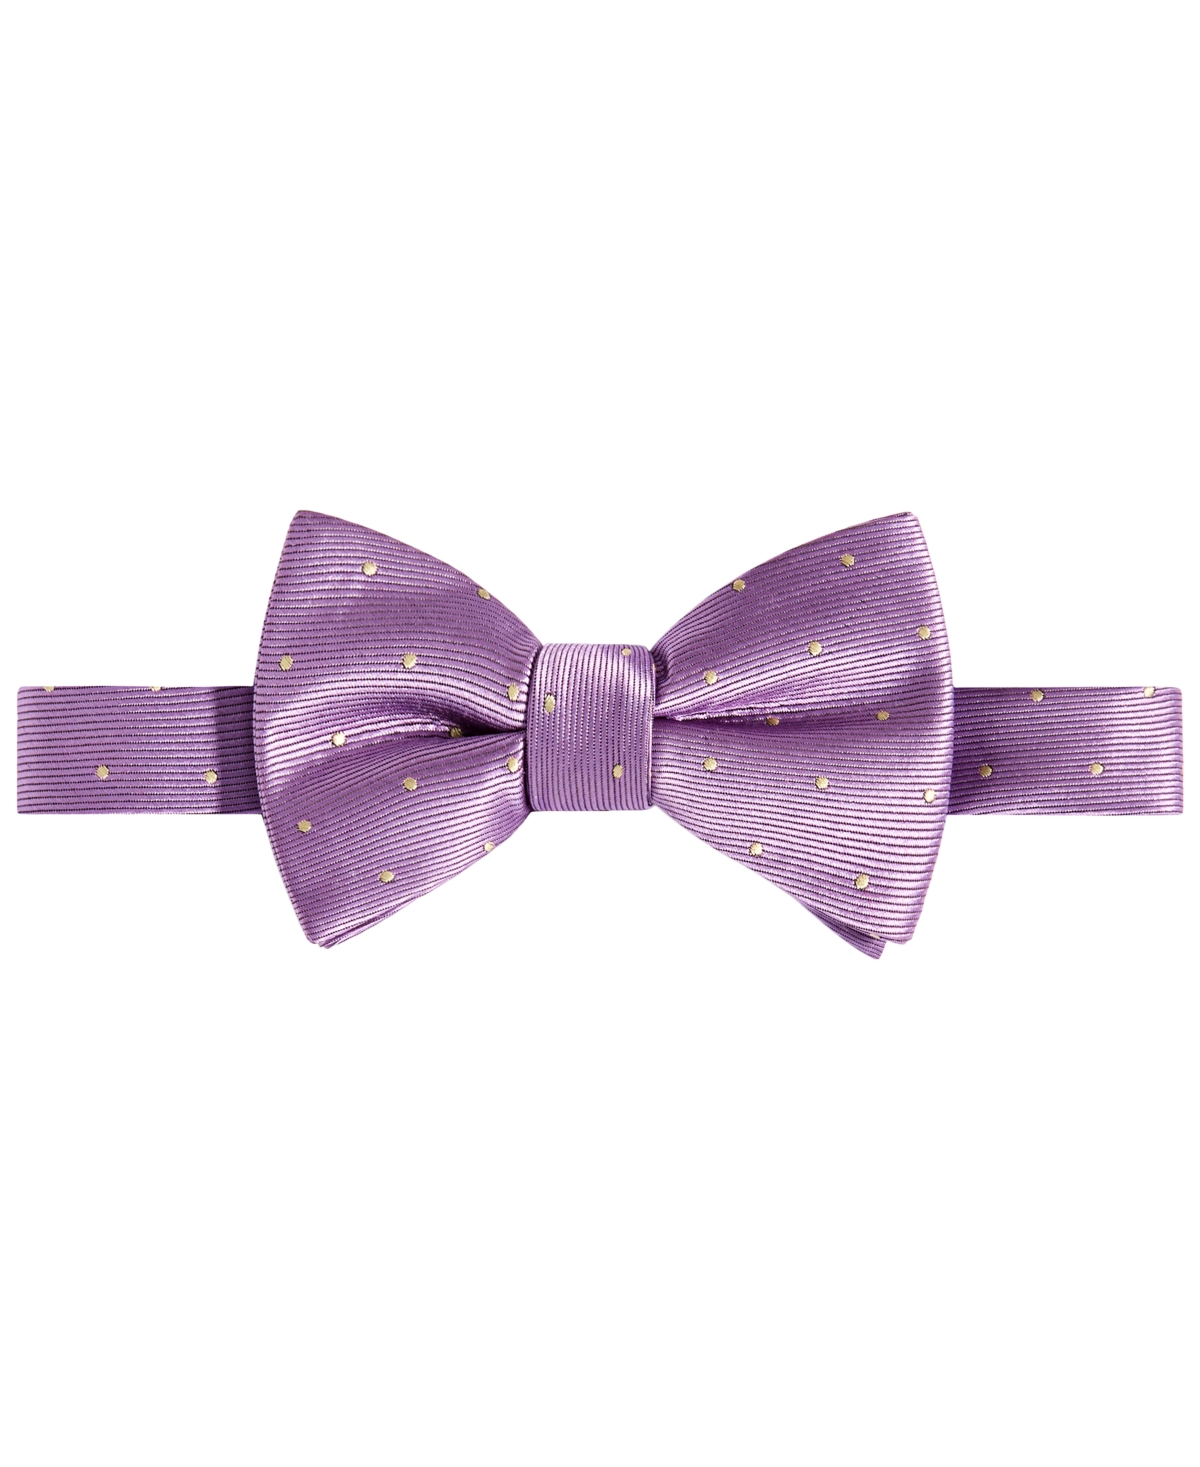 Shop Tayion Collection Men's Purple & Gold Solid Bow Tie